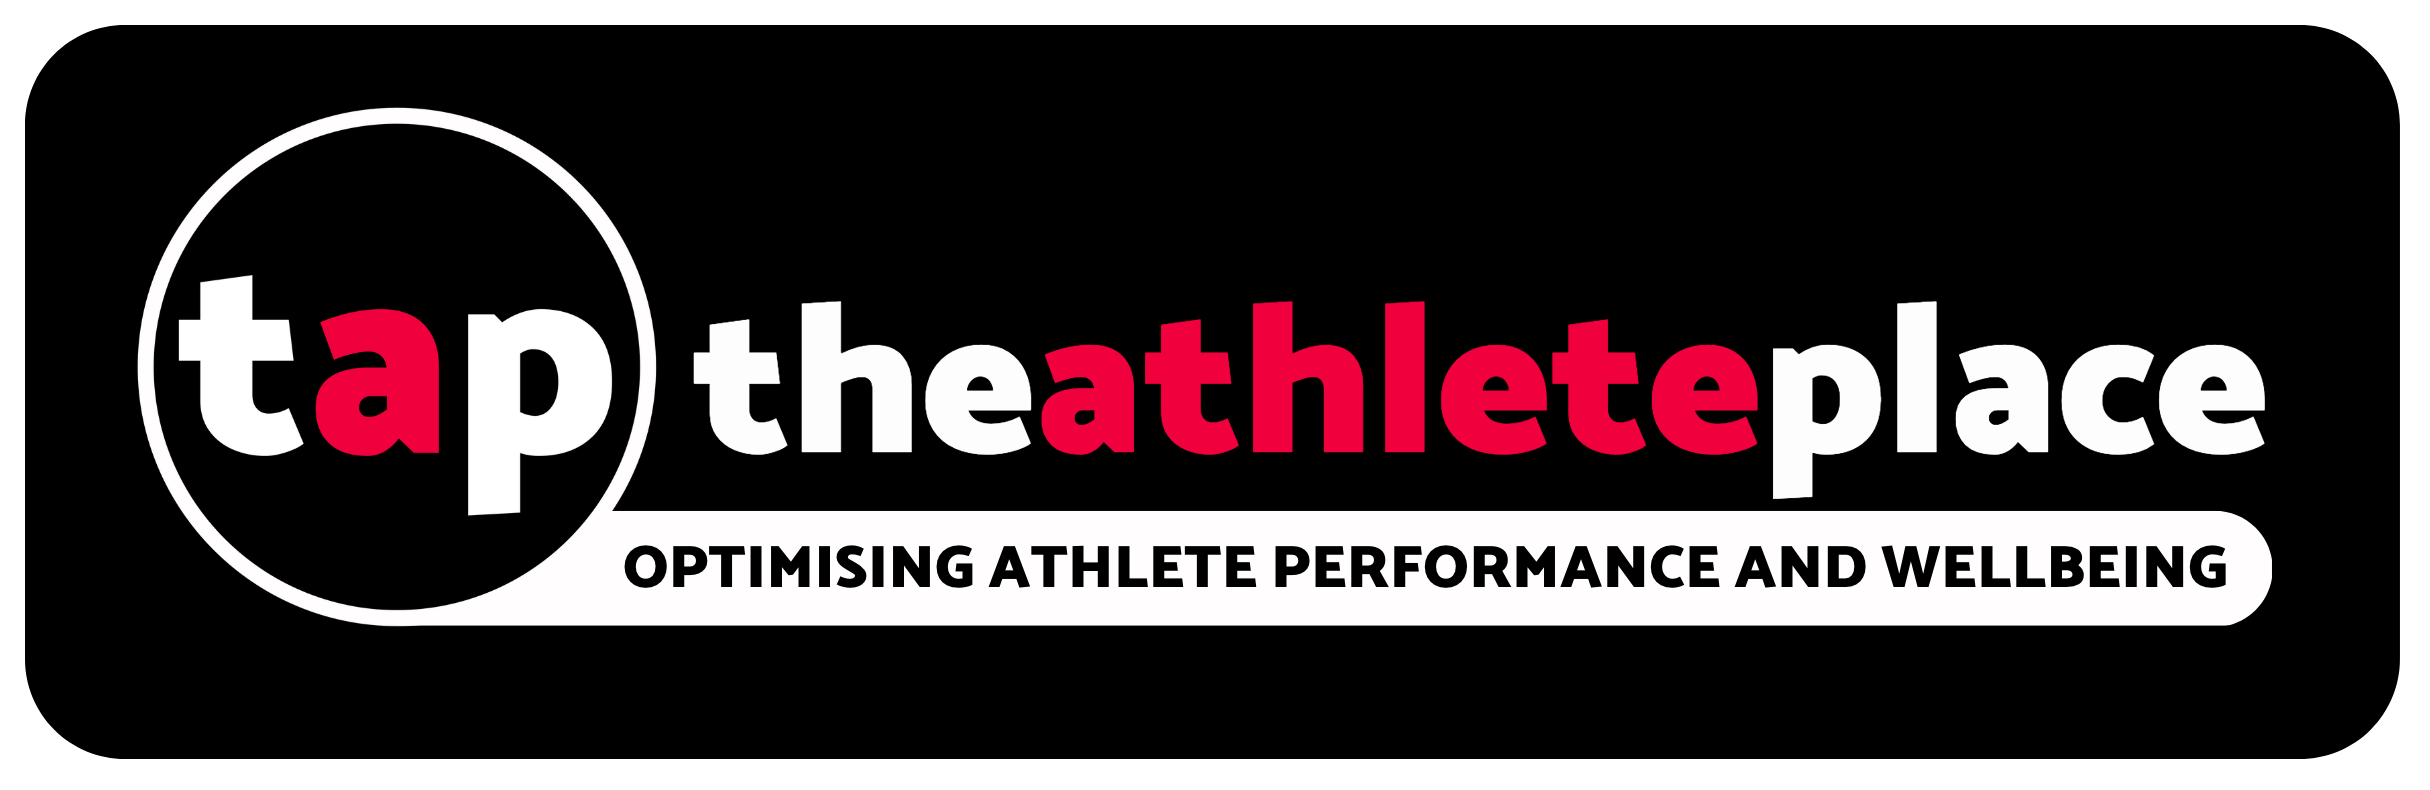 Black background with The Athlete Place in white text 